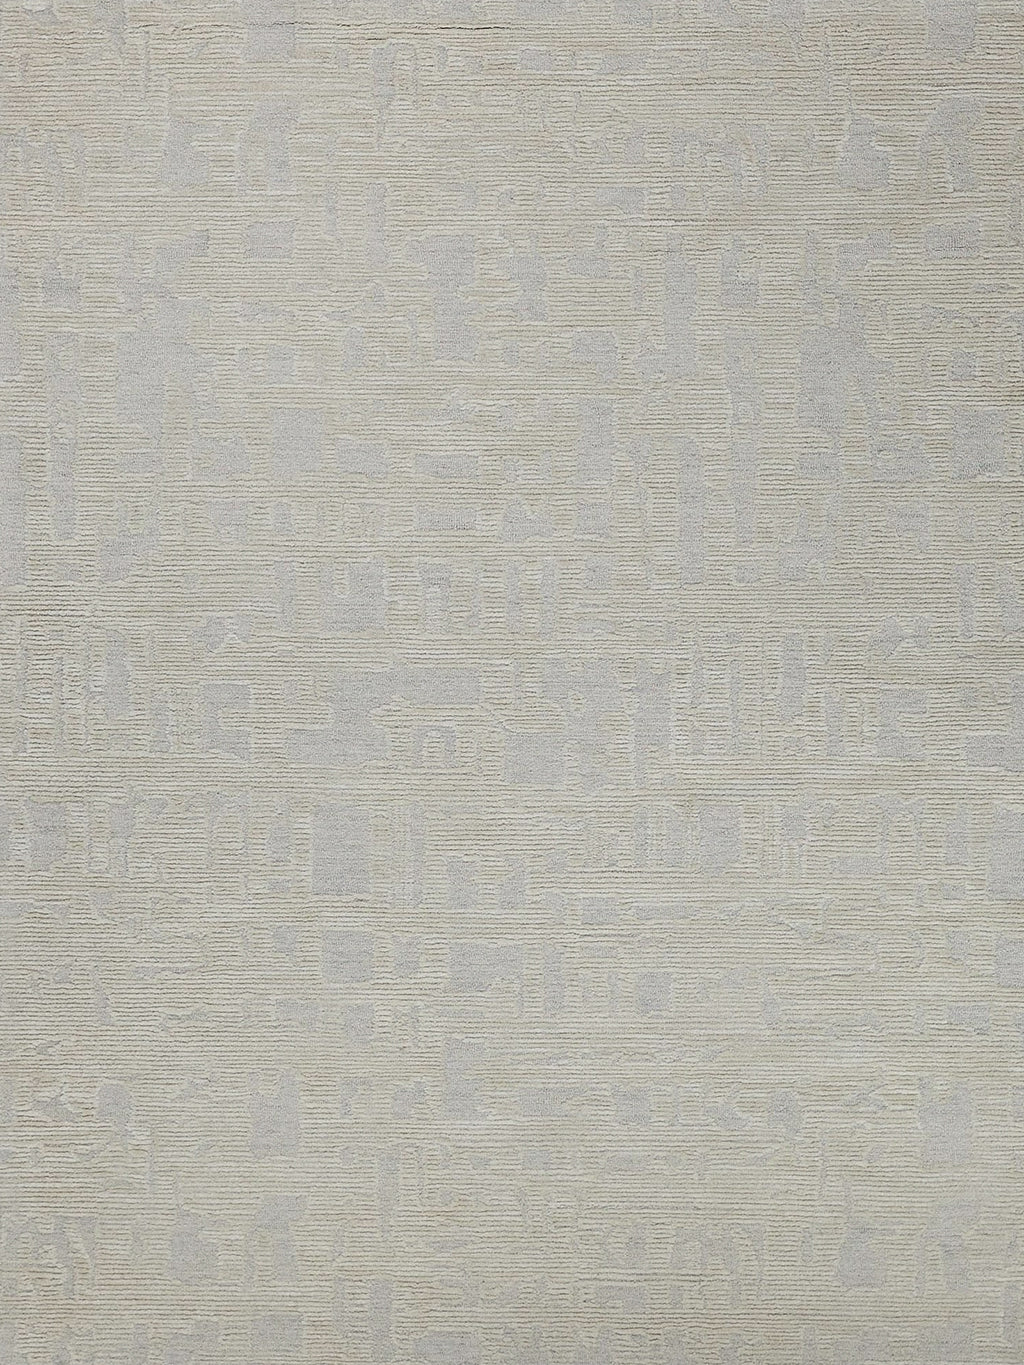 Exquisite Rugs Aspen 6828 Silver/Ivory Area Rug